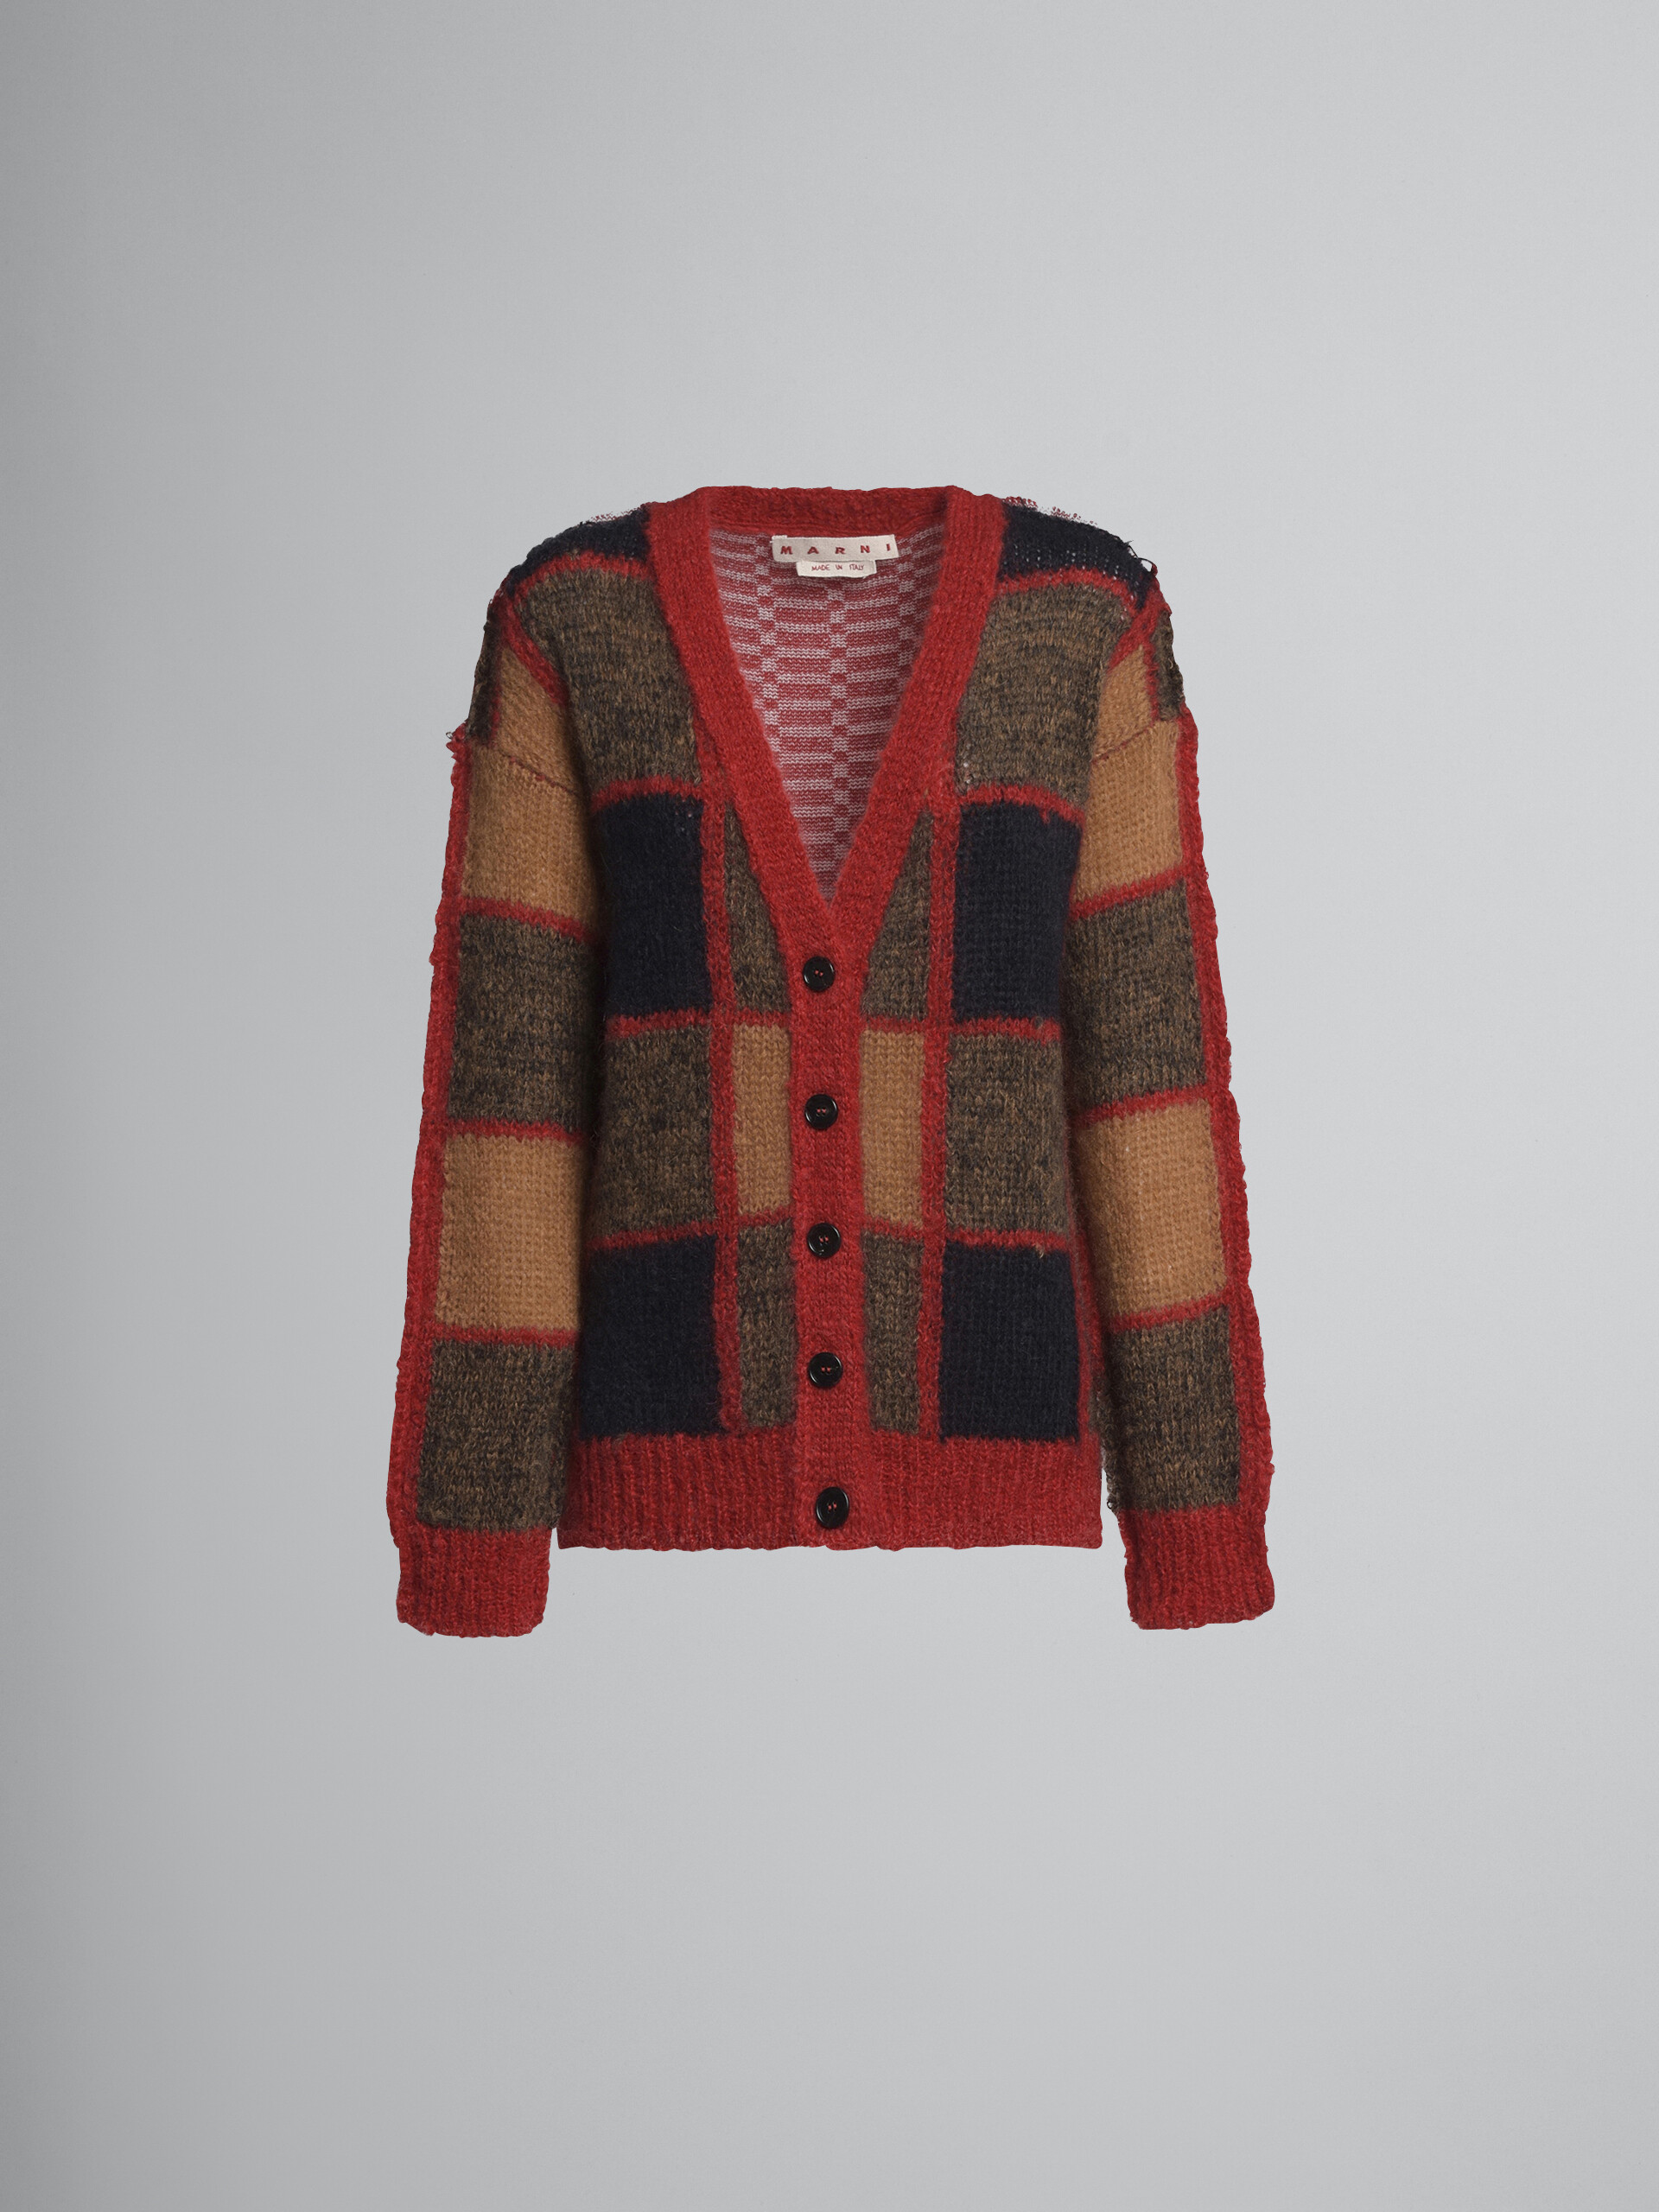 Mohair and wool long cardigan - Pullovers - Image 1